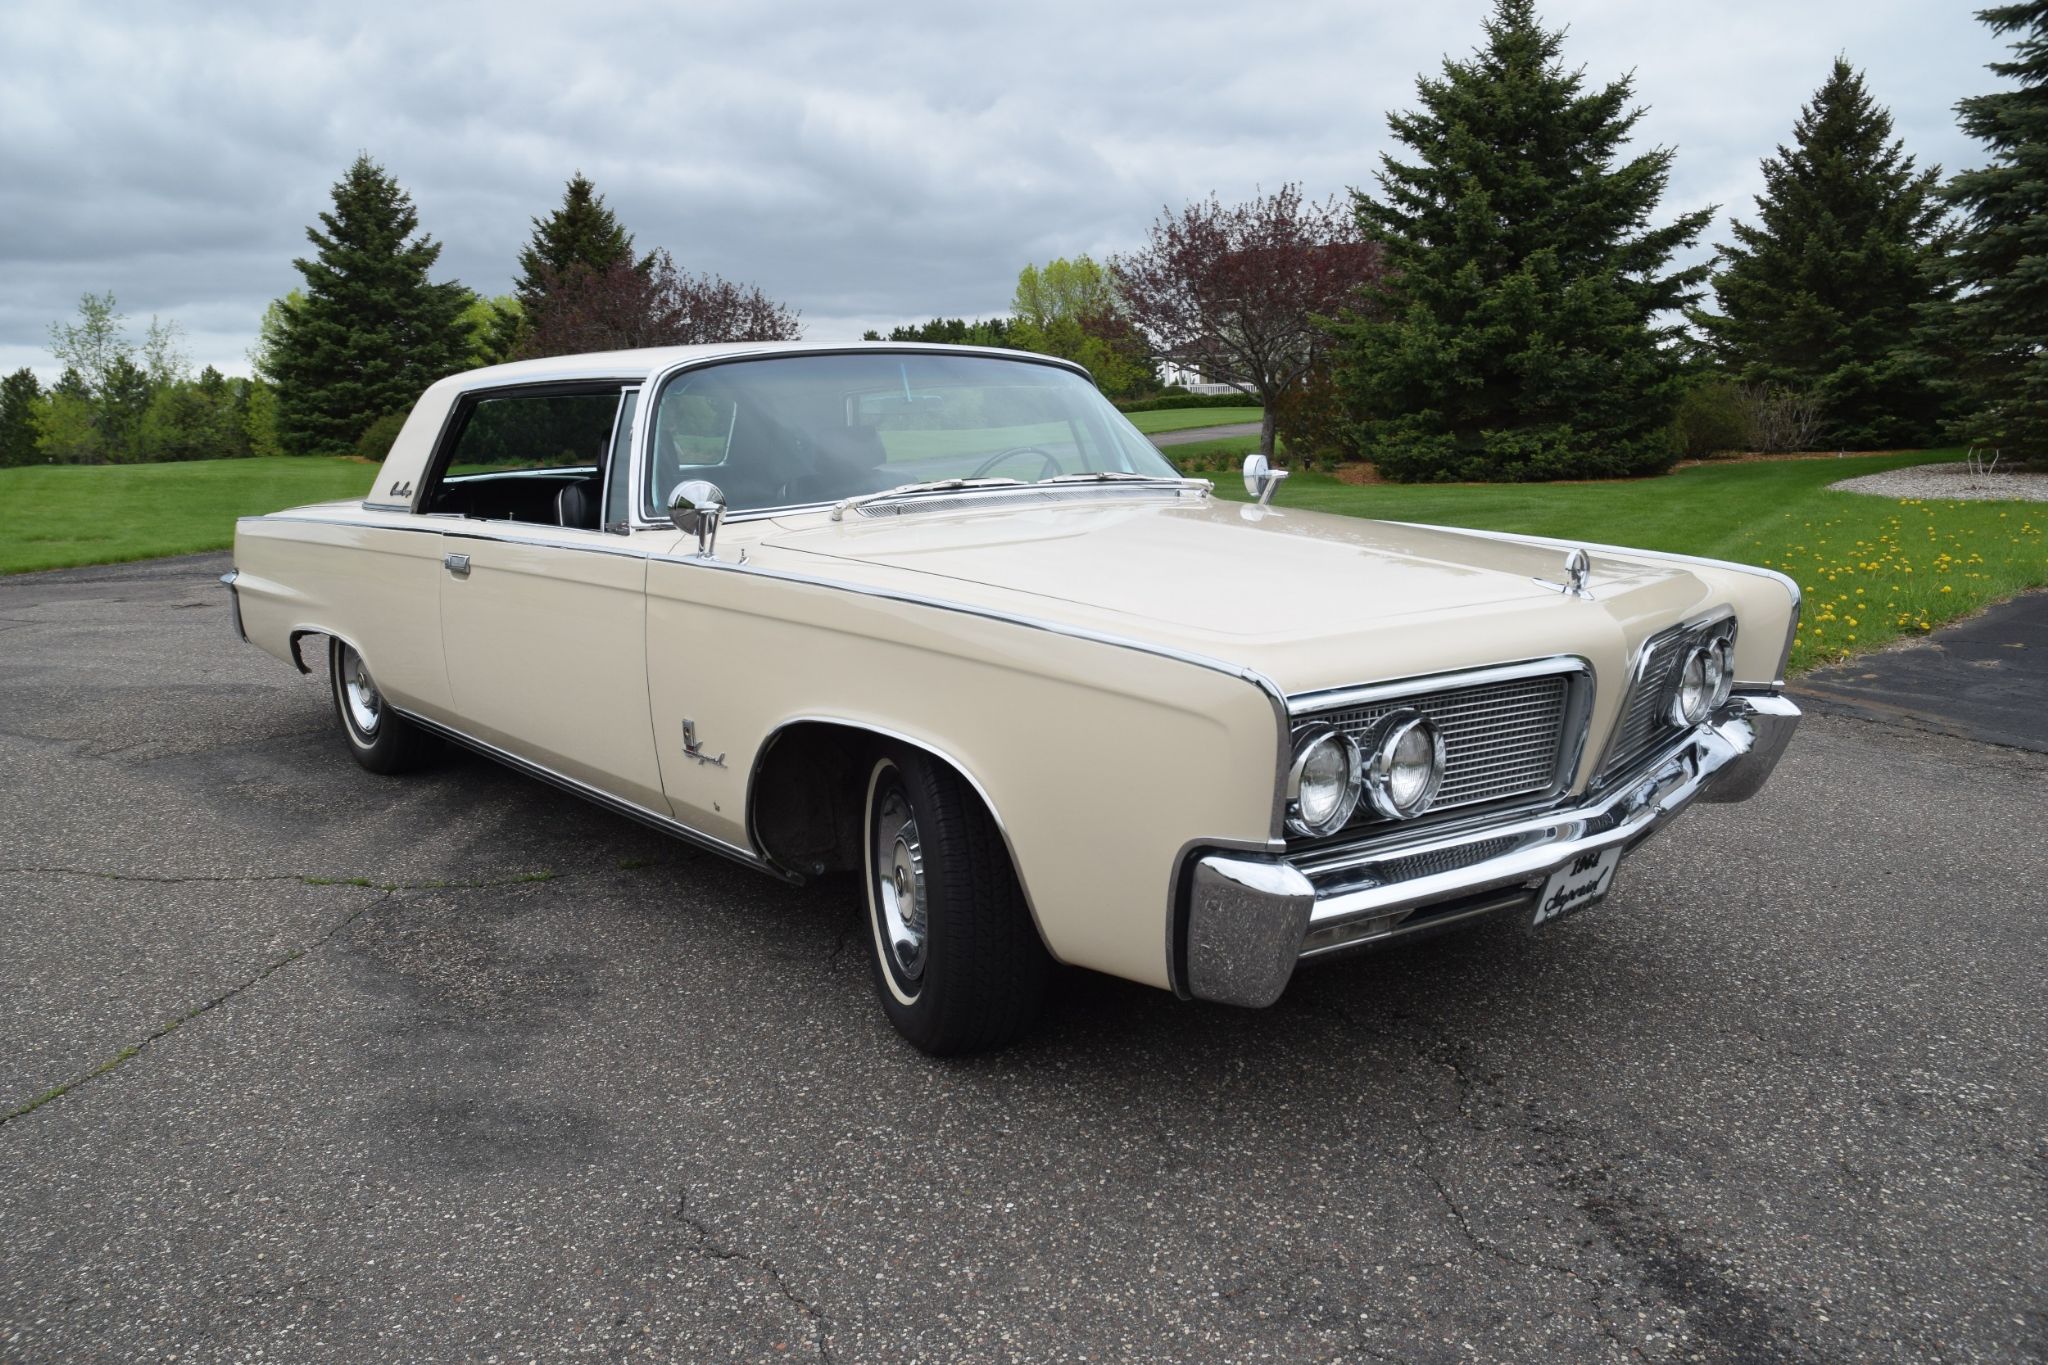  Chrysler Imperial Crown Coupe